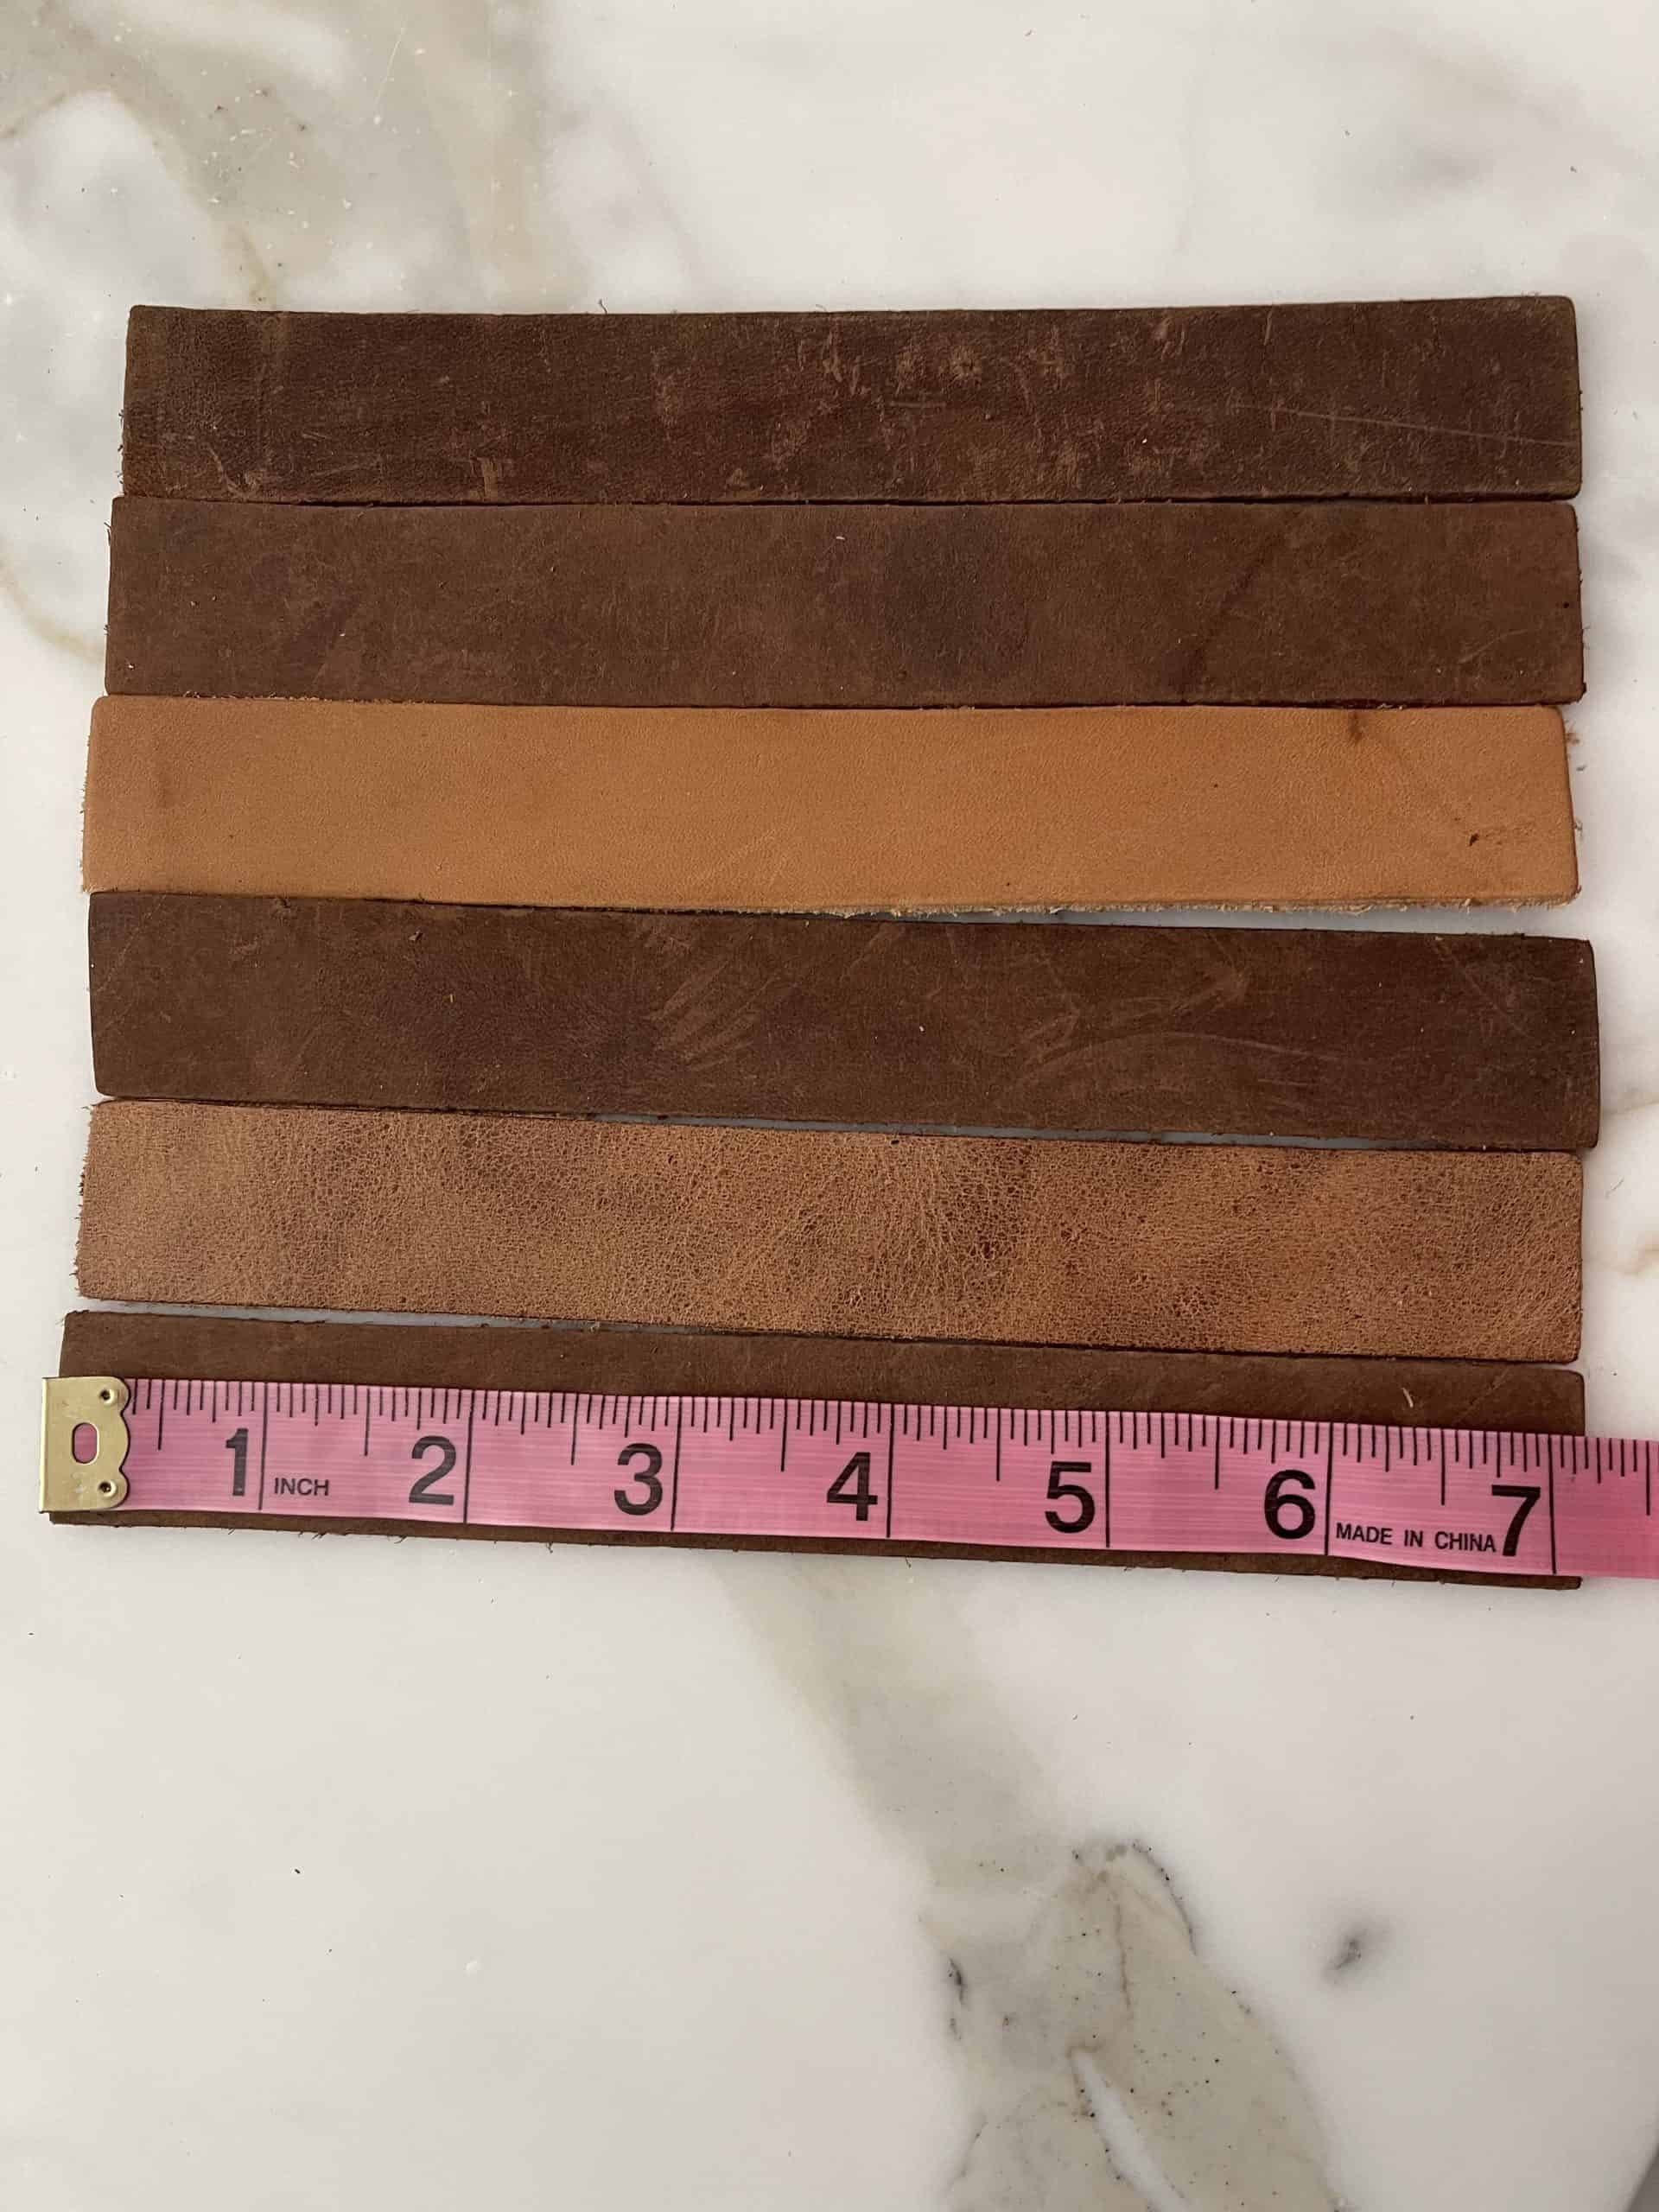 lether strips cut showing 7 inches on a measuring tape